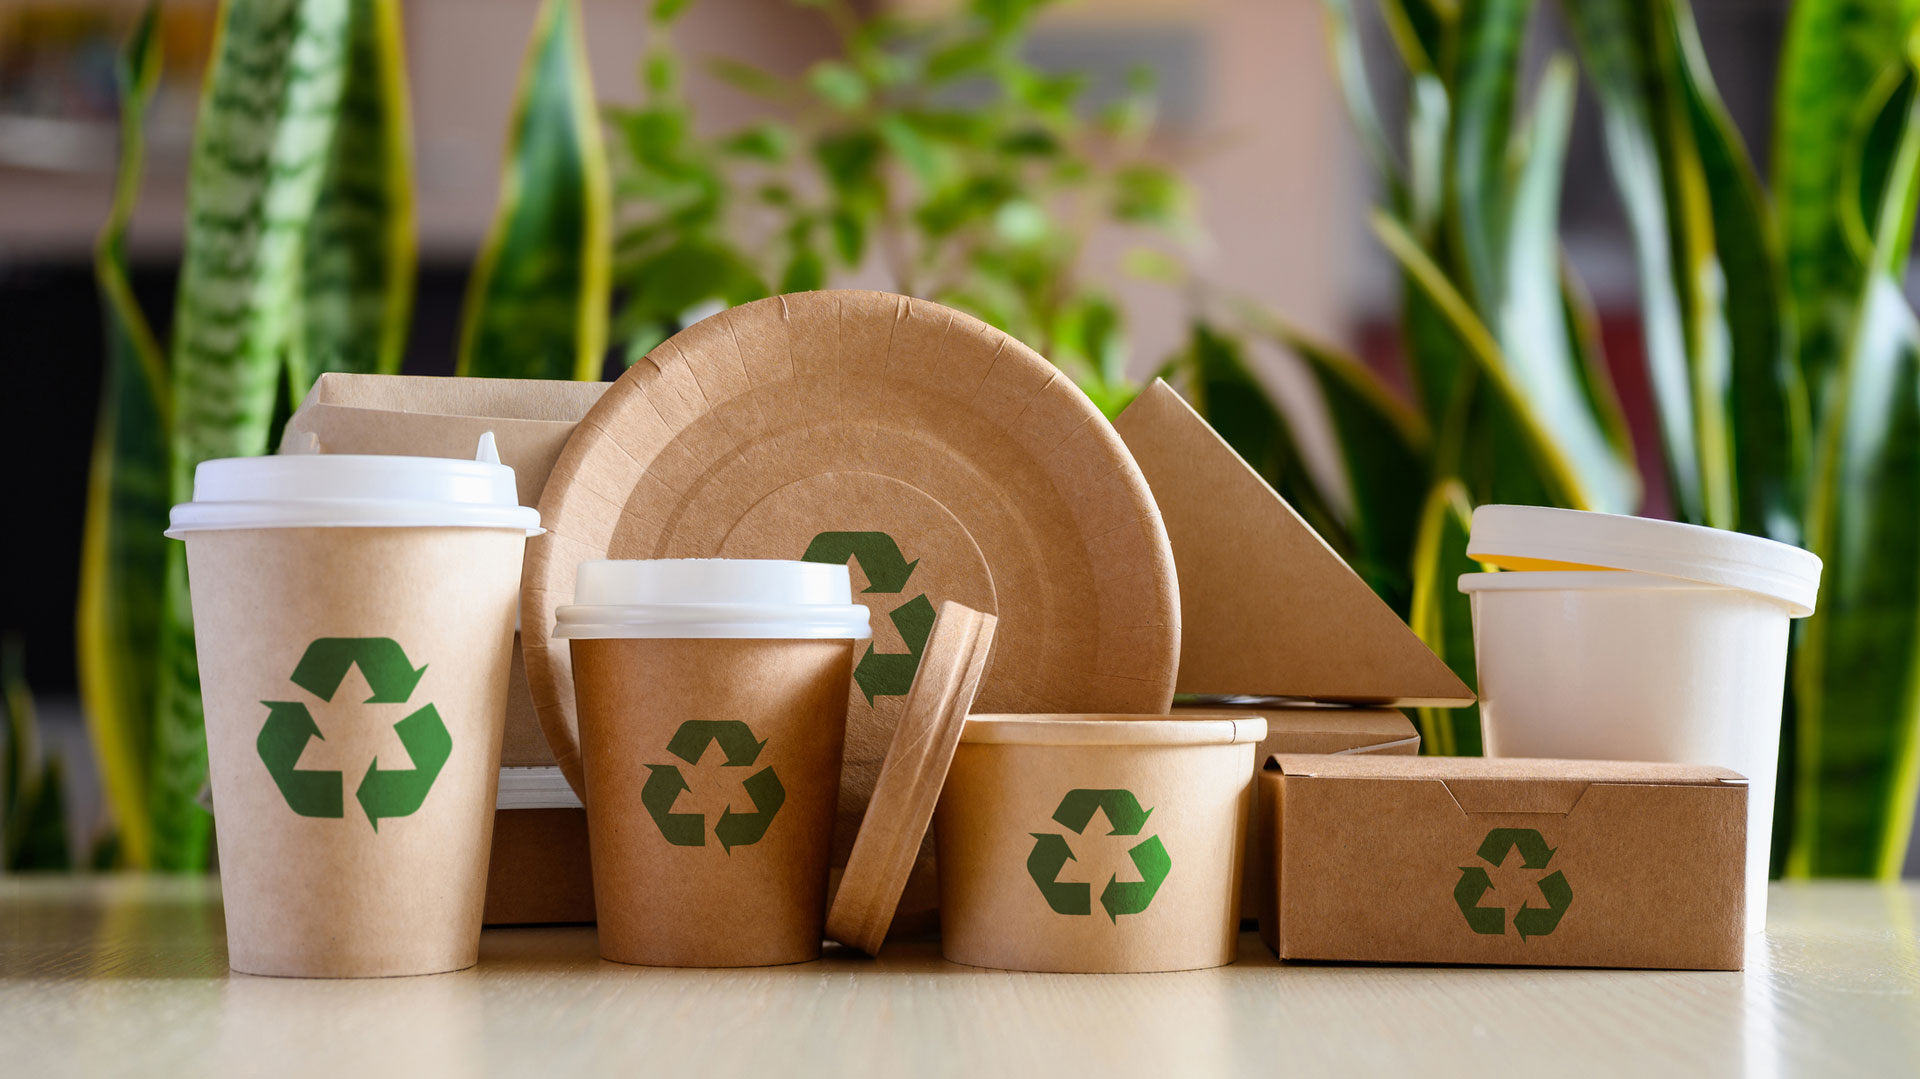 recyclable products